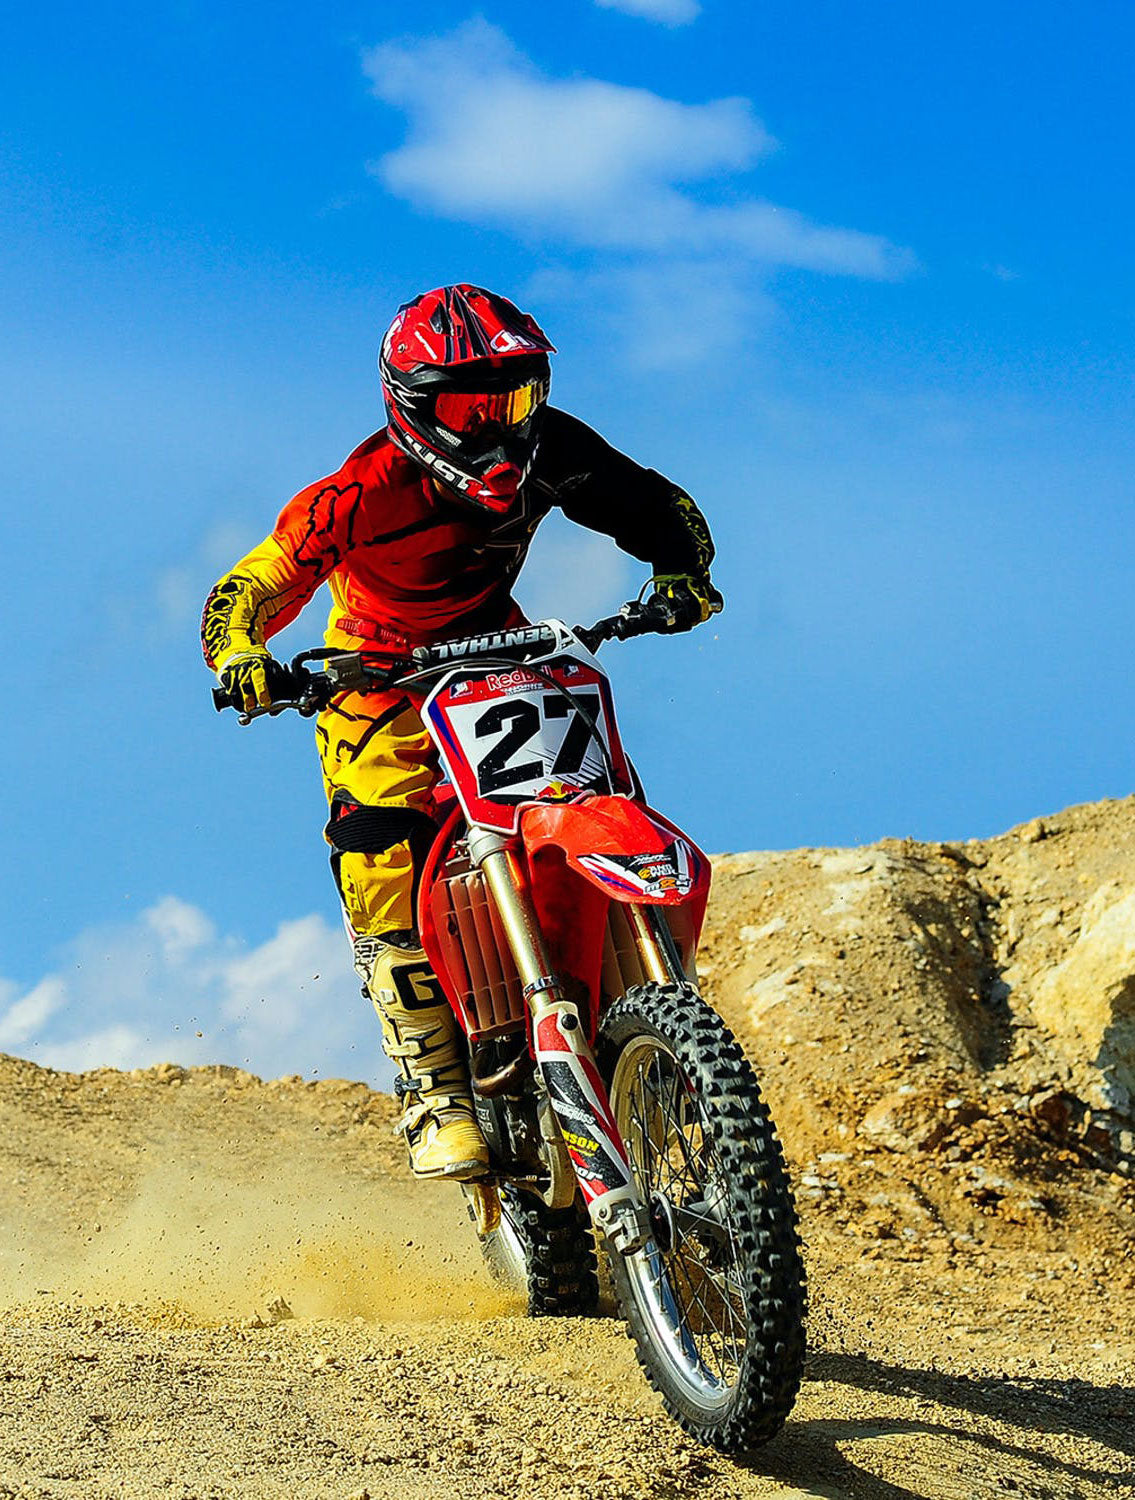 Motorcycle and Dirt Bike Rental in Los Angeles and Southern California